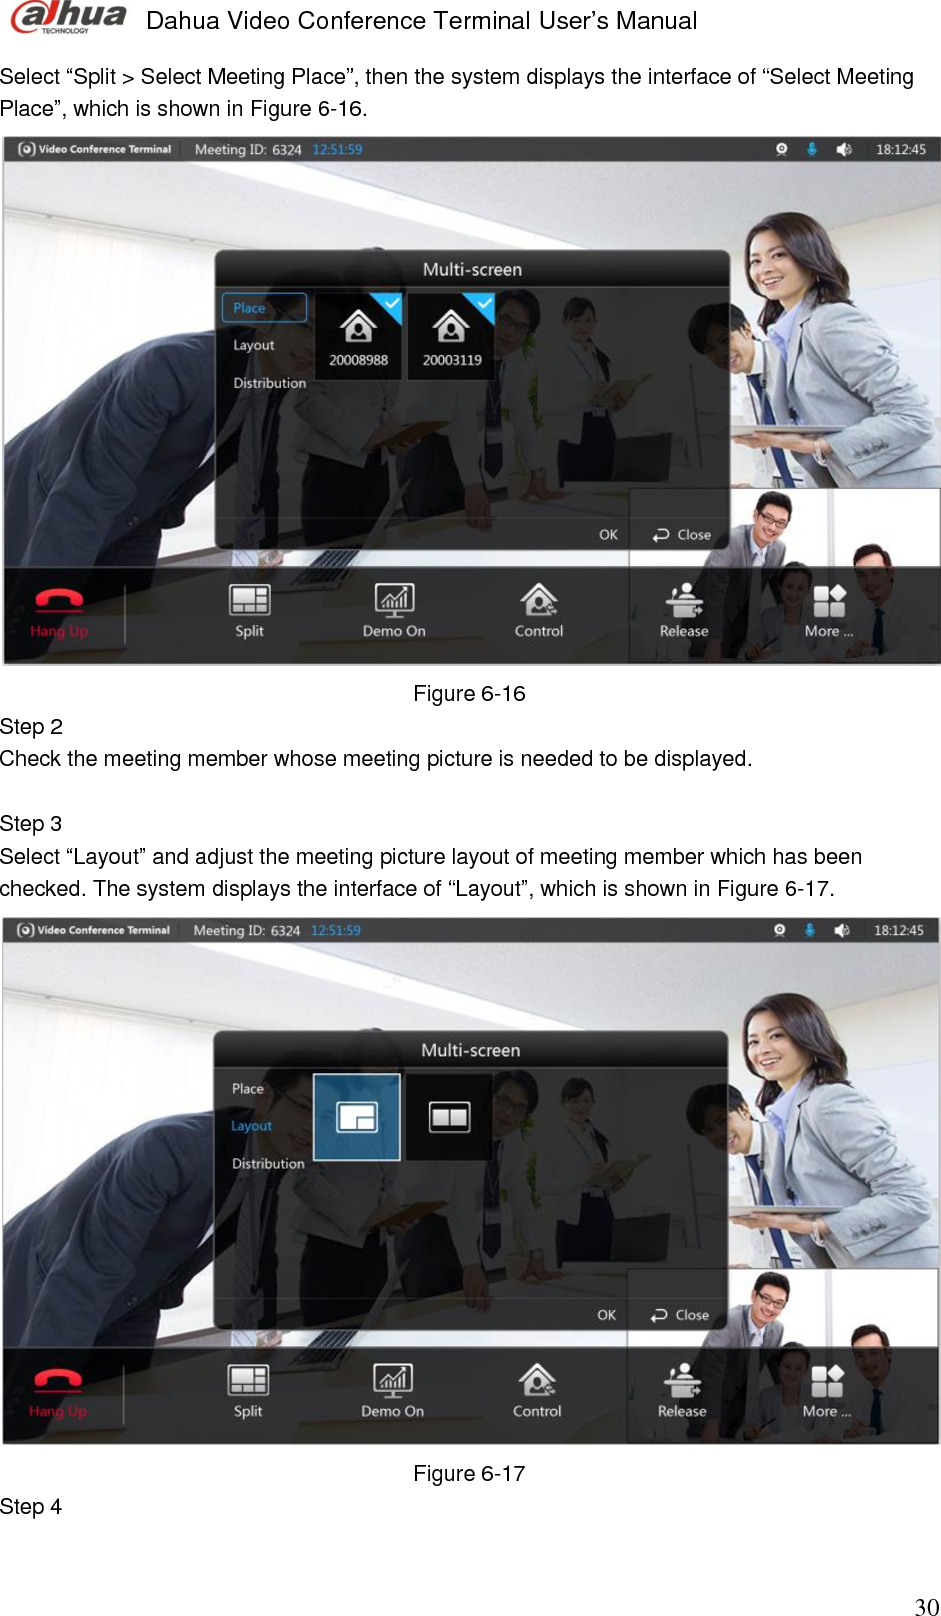  Dahua Video Conference Terminal User’s Manual                                                                              30 Select “Split &gt; Select Meeting Place”, then the system displays the interface of “Select Meeting Place”, which is shown in Figure 6-16.   Figure 6-16 Step 2  Check the meeting member whose meeting picture is needed to be displayed.   Step 3  Select “Layout” and adjust the meeting picture layout of meeting member which has been checked. The system displays the interface of “Layout”, which is shown in Figure 6-17.  Figure 6-17 Step 4  